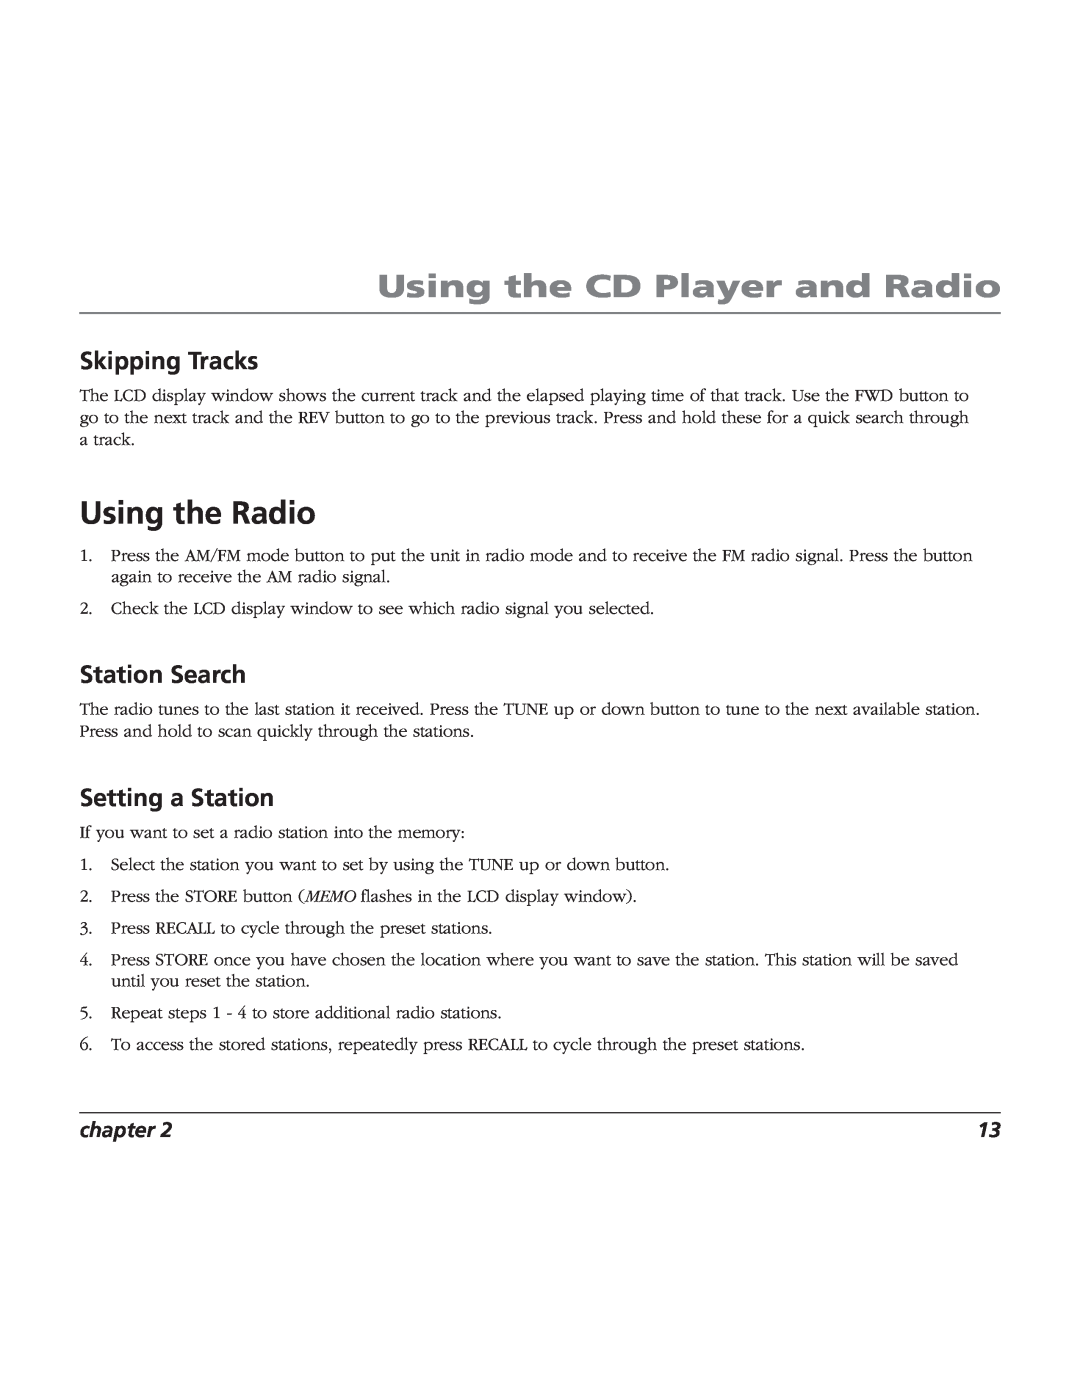 RCA TV/Radio/CD Player Using the Radio, Skipping Tracks, Station Search, Setting a Station, Using the CD Player and Radio 